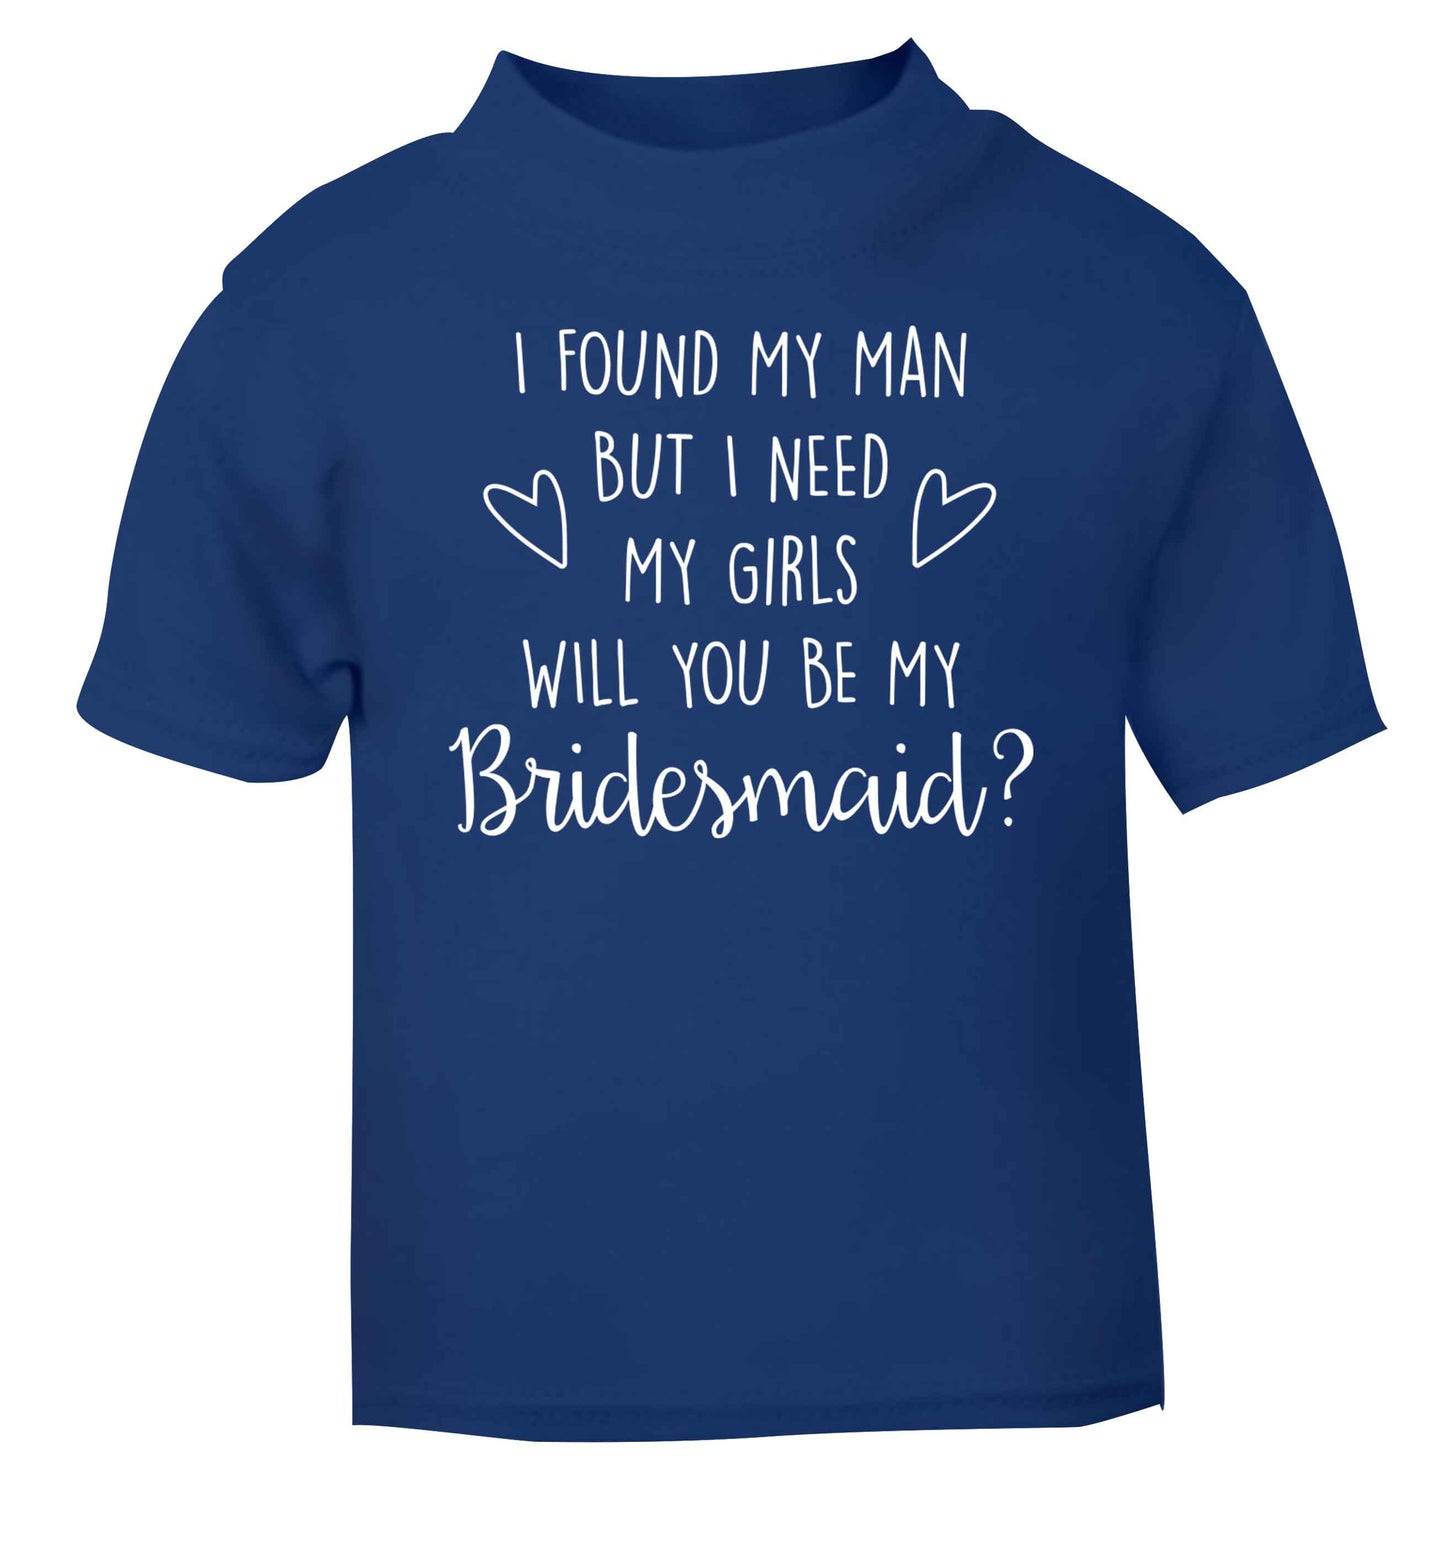 I found my man but I need my girls will you be my bridesmaid? blue baby toddler Tshirt 2 Years